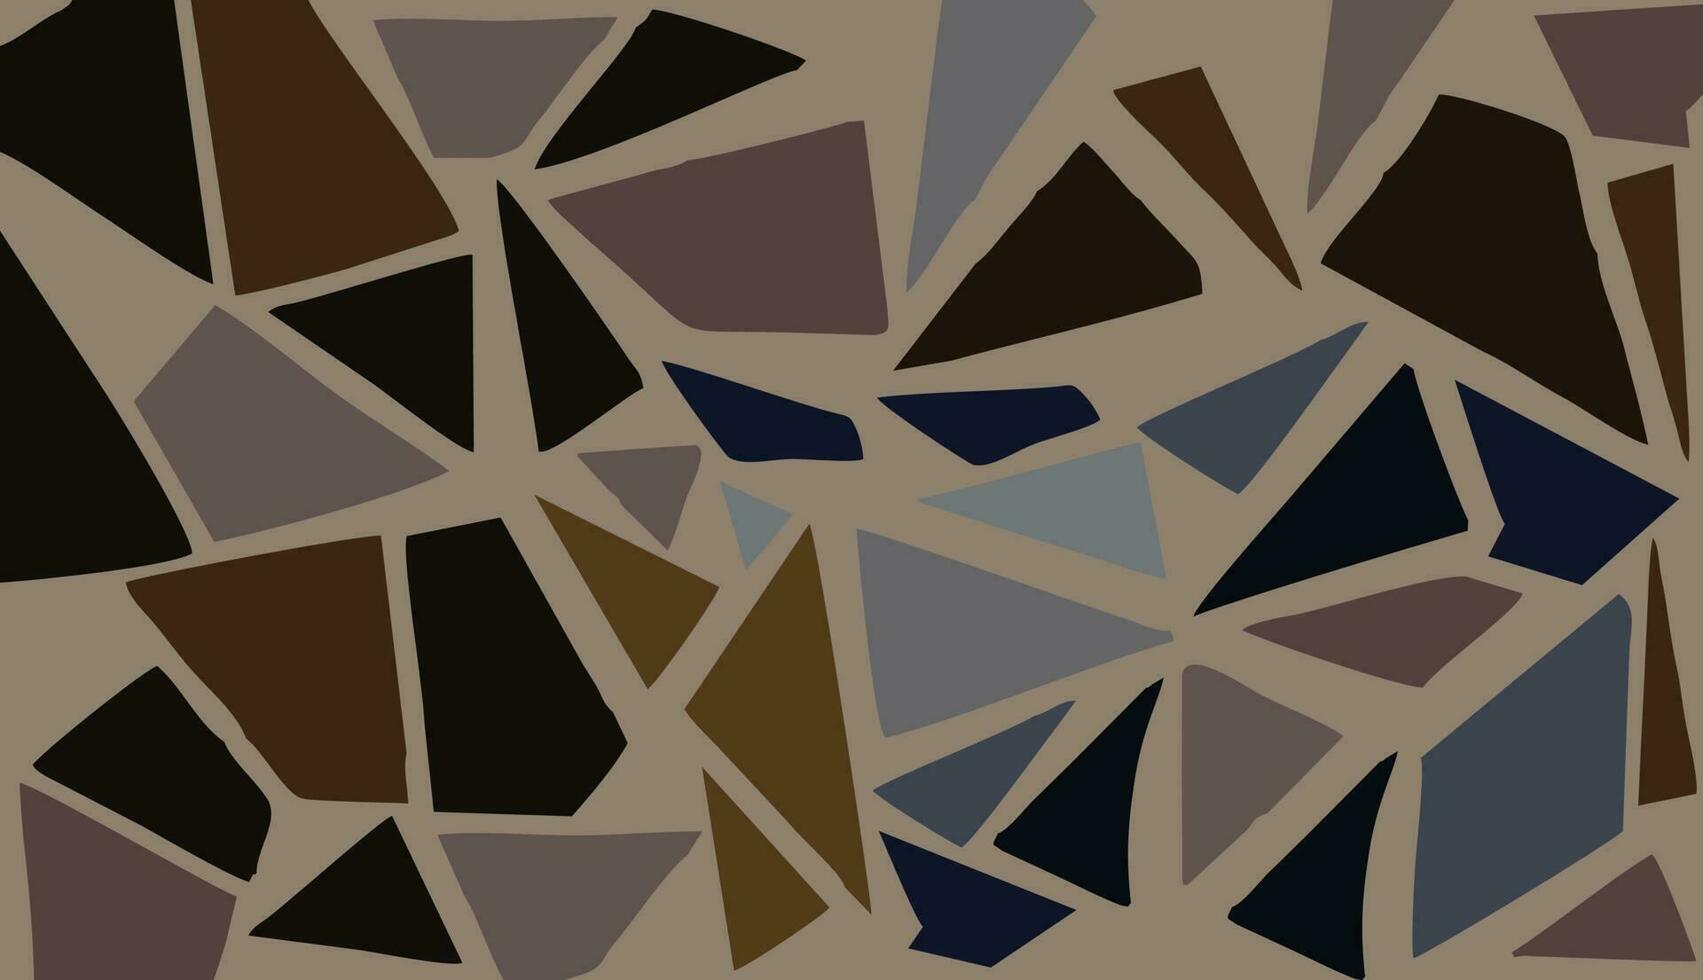 Seamless mosaic pattern with brown, brown and beige triangles. The background is soft brown with a mosaic pattern of an arrangement of abstract shapes. Suitable for room decoration vector